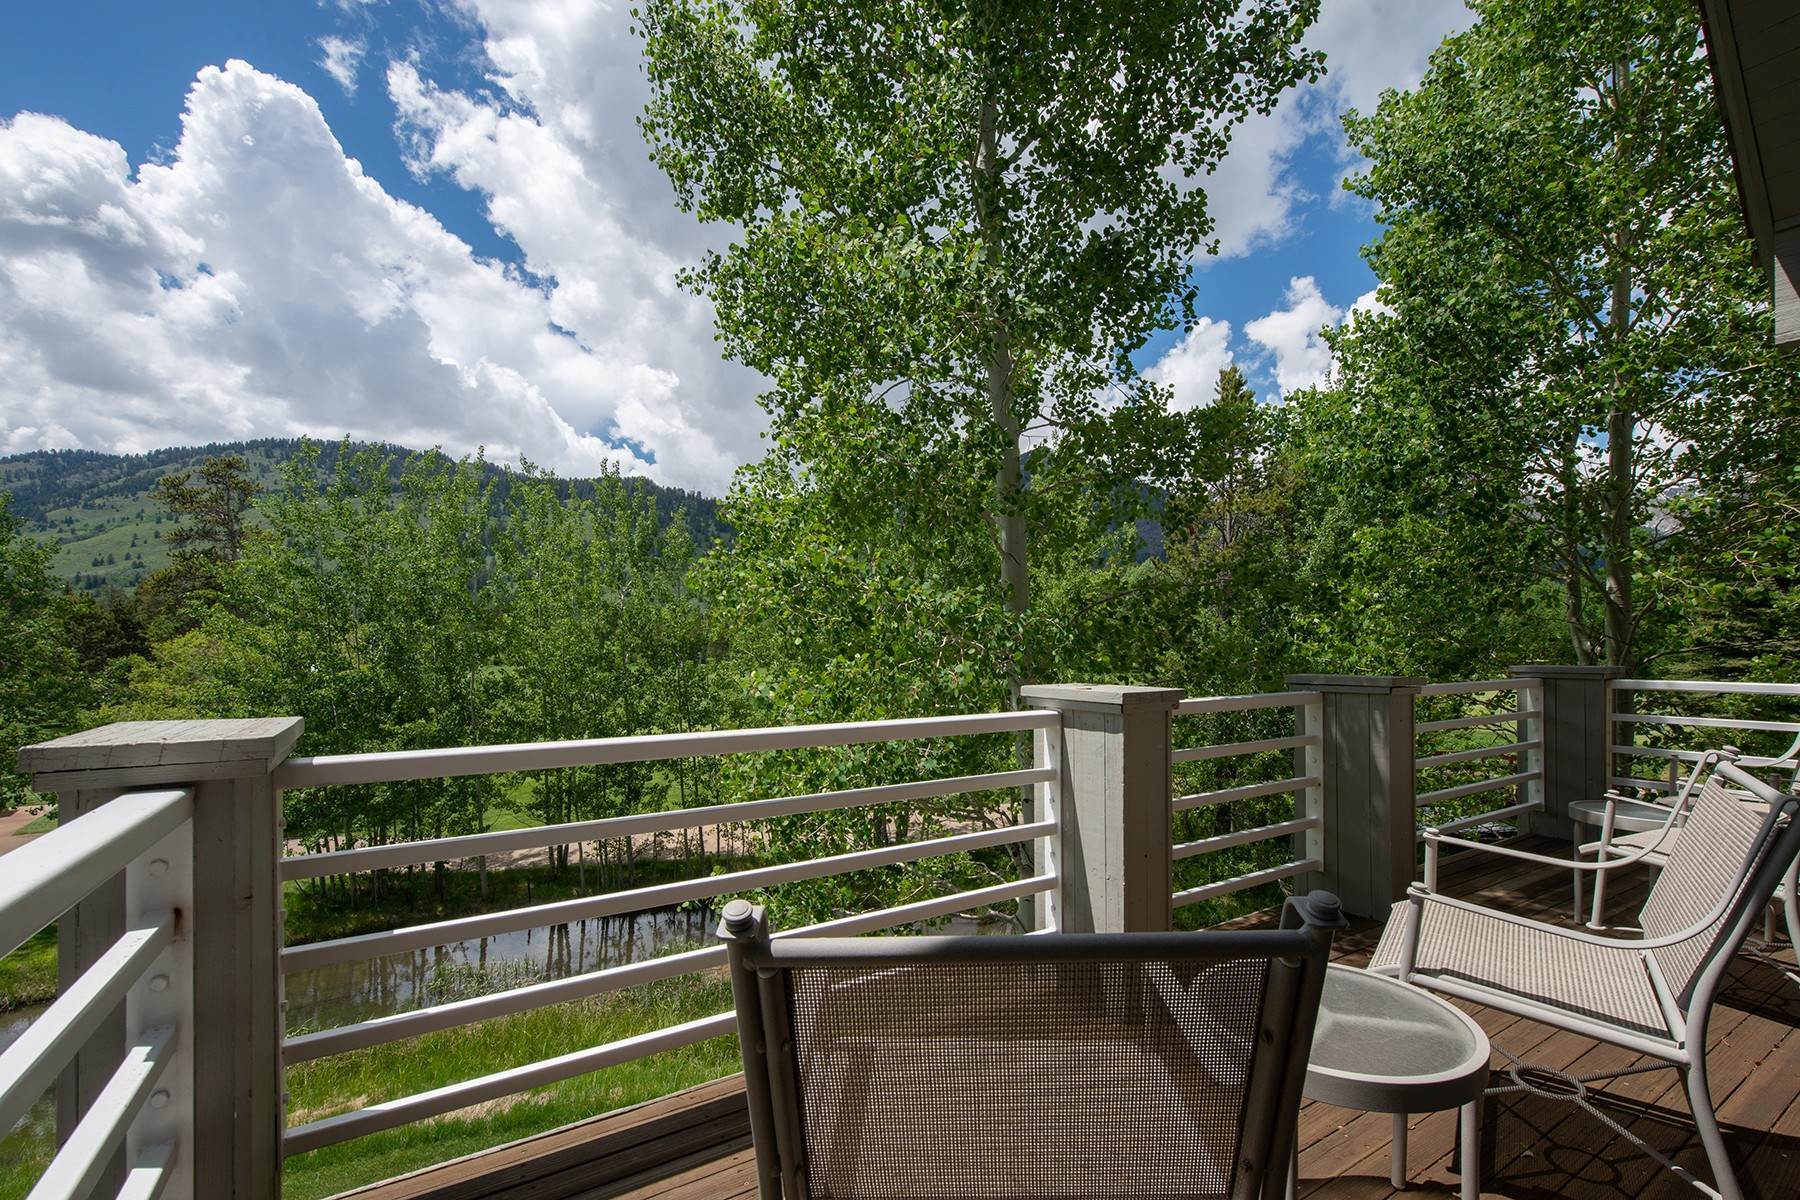 23. Fractional Ownership Property for Sale at Teton Pines Residence Club 3466 N Clubhouse Drive Wilson, Wyoming 83014 United States